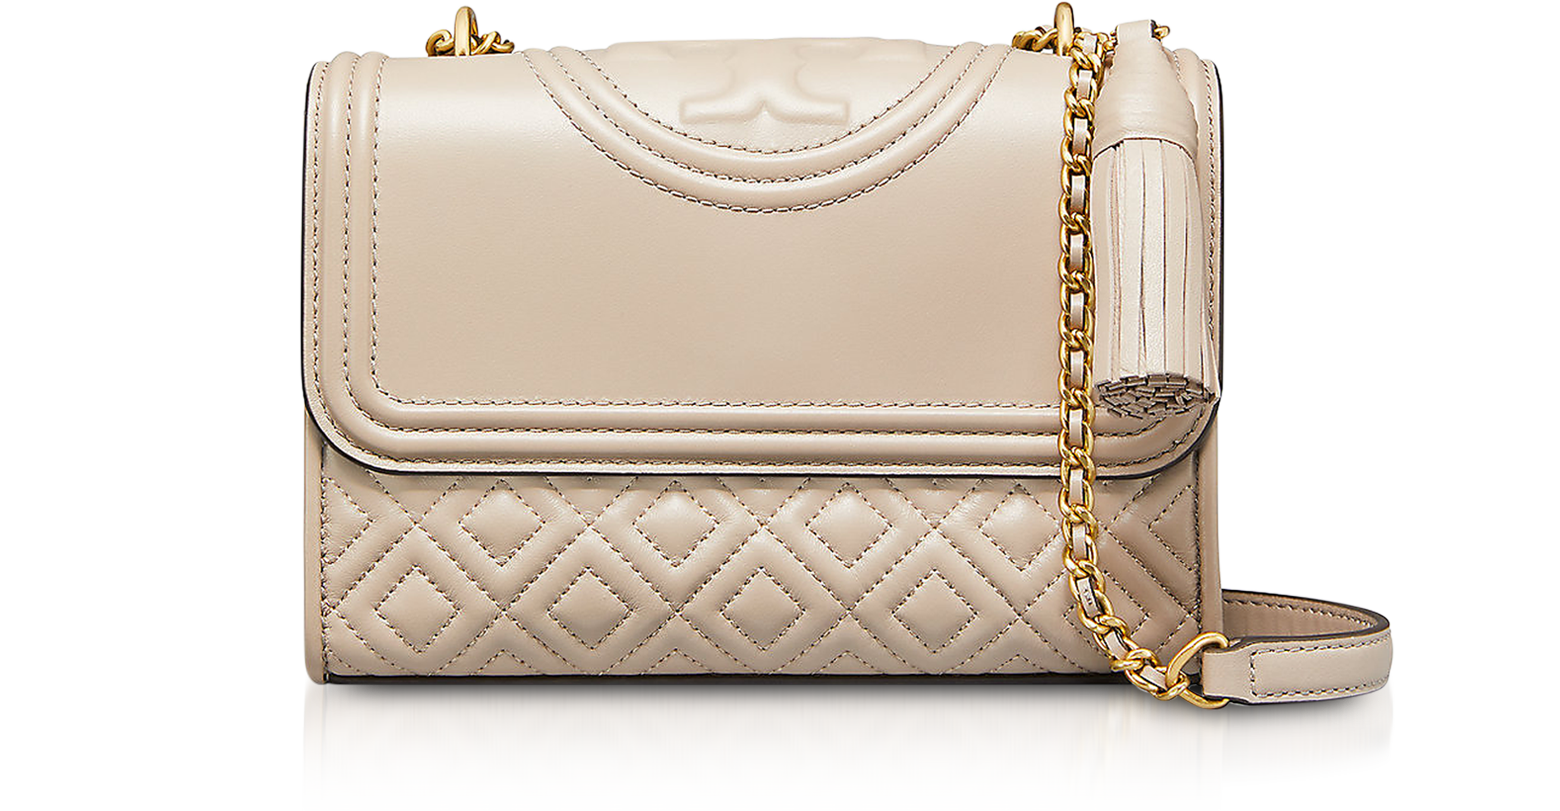 Tory Burch Light Taupe Leather Fleming Small Convertible Shoulder